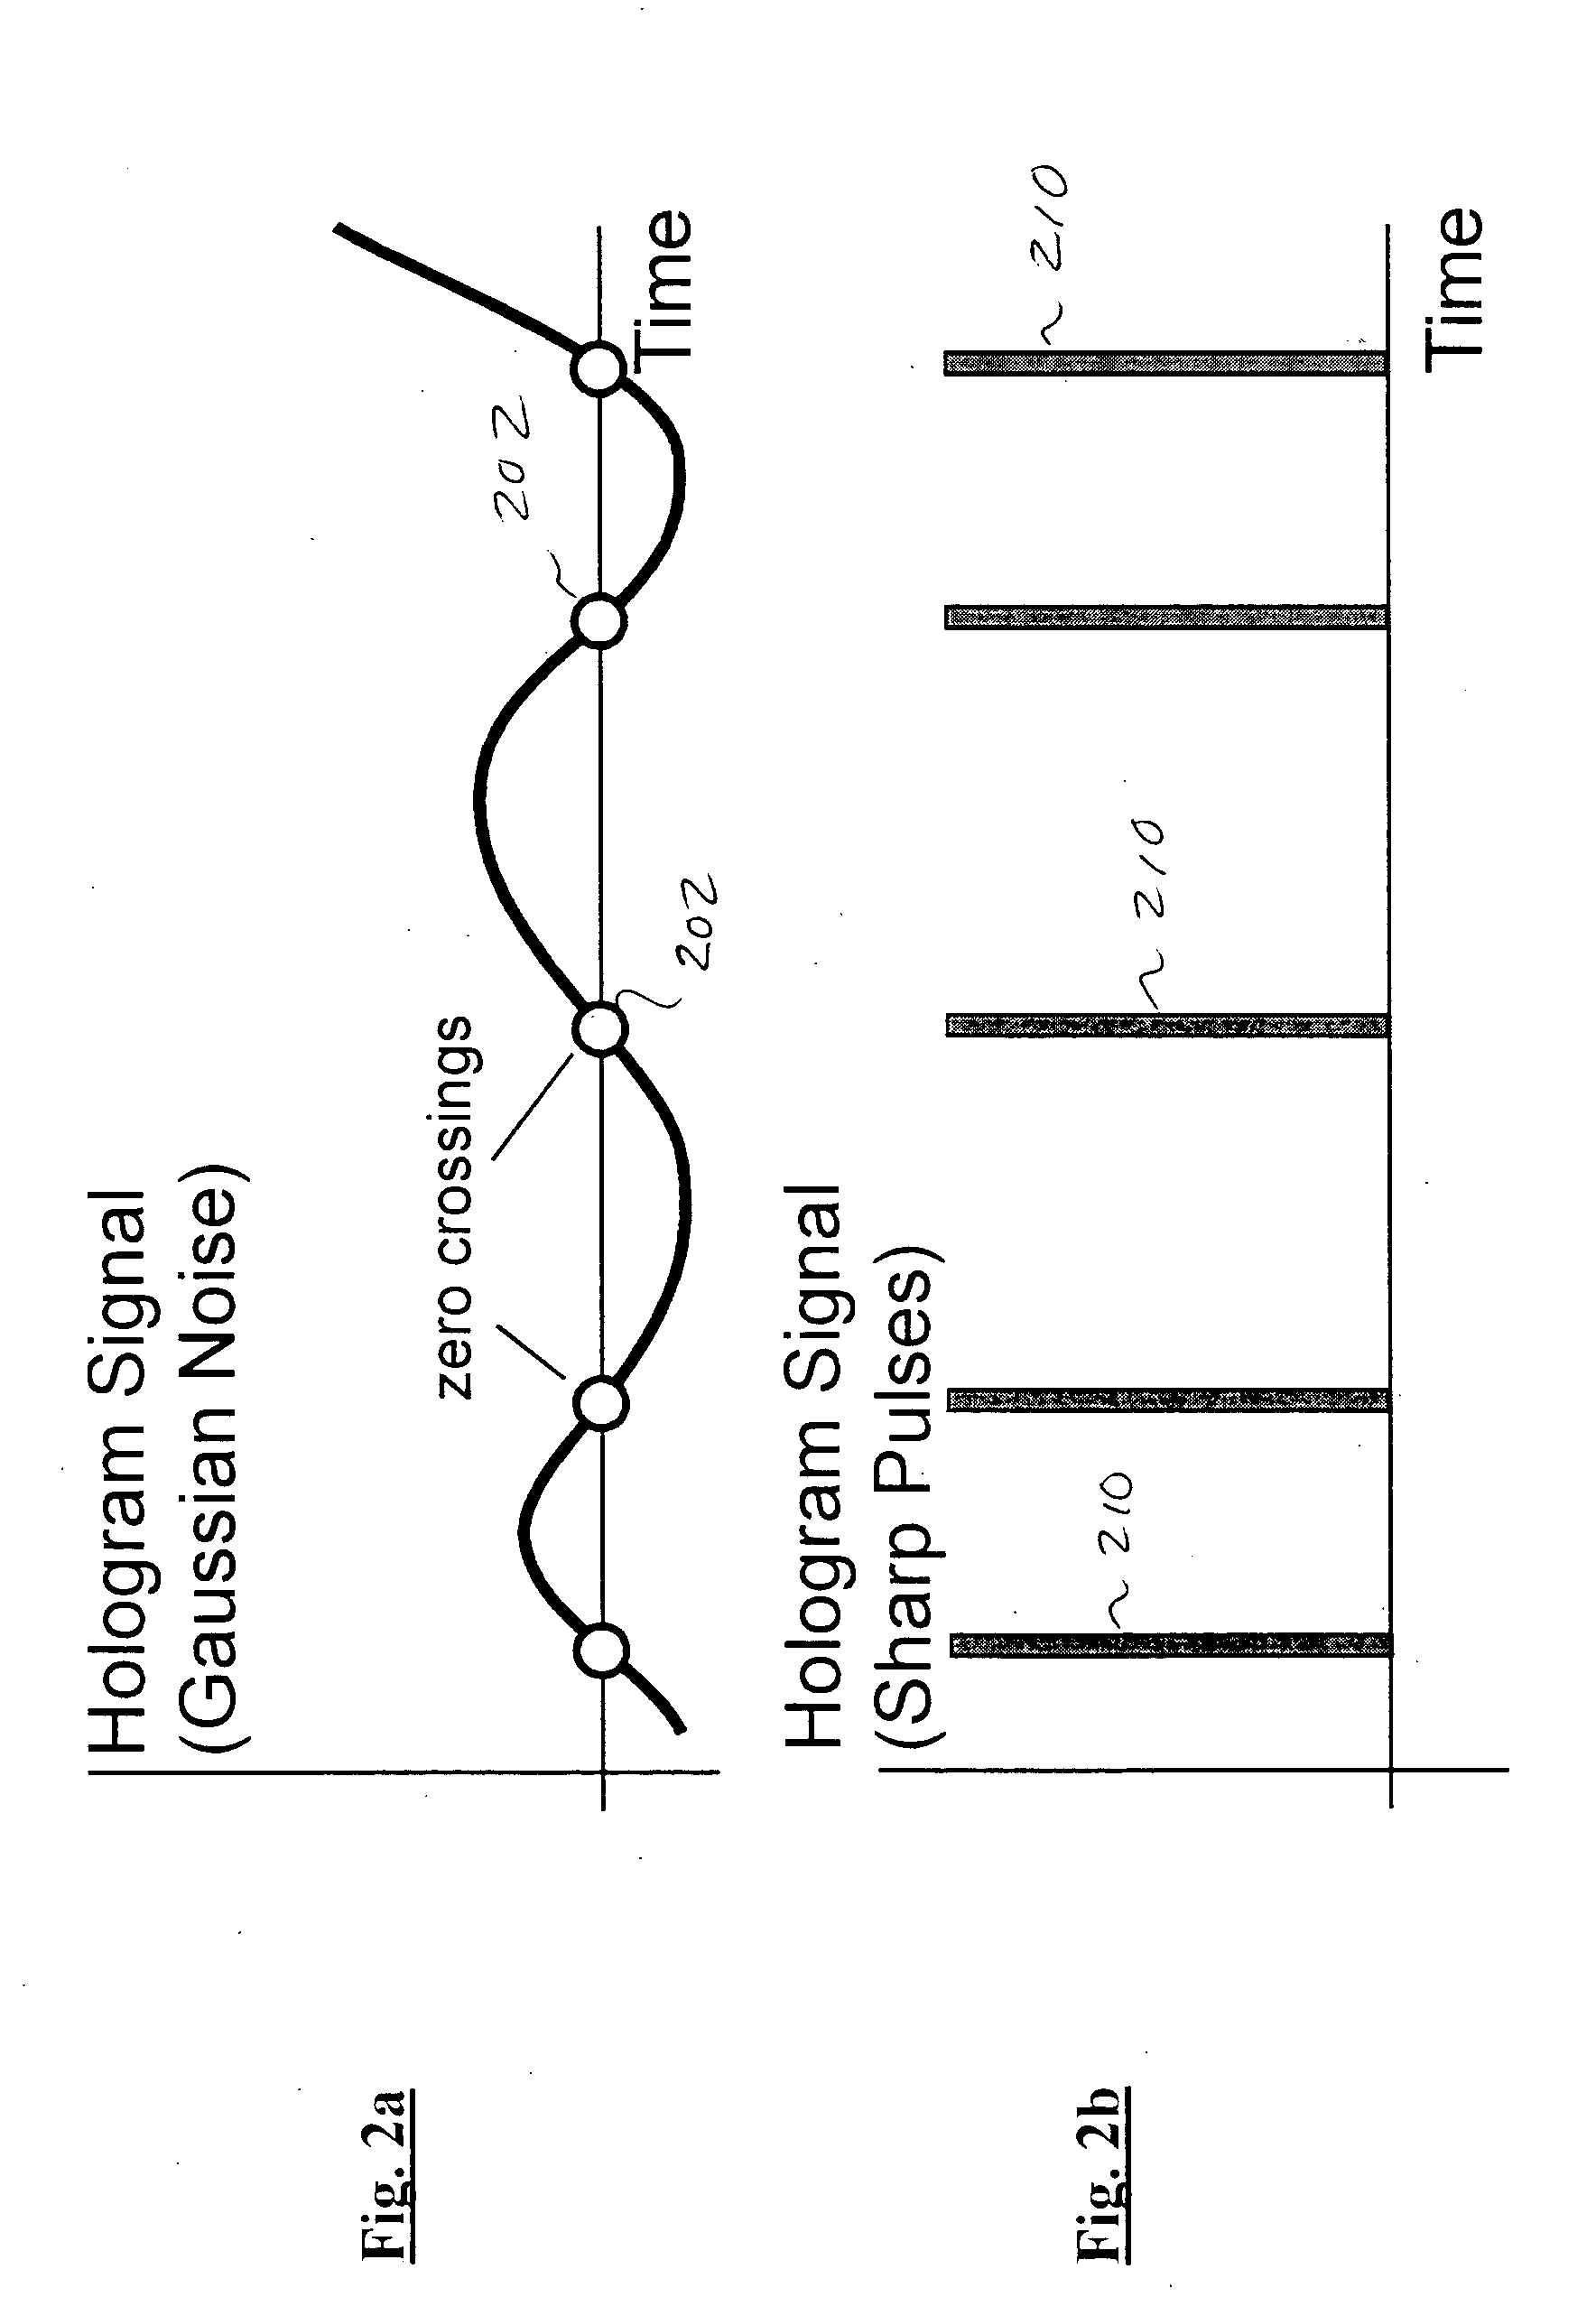 Holographic ranging apparatus and methods